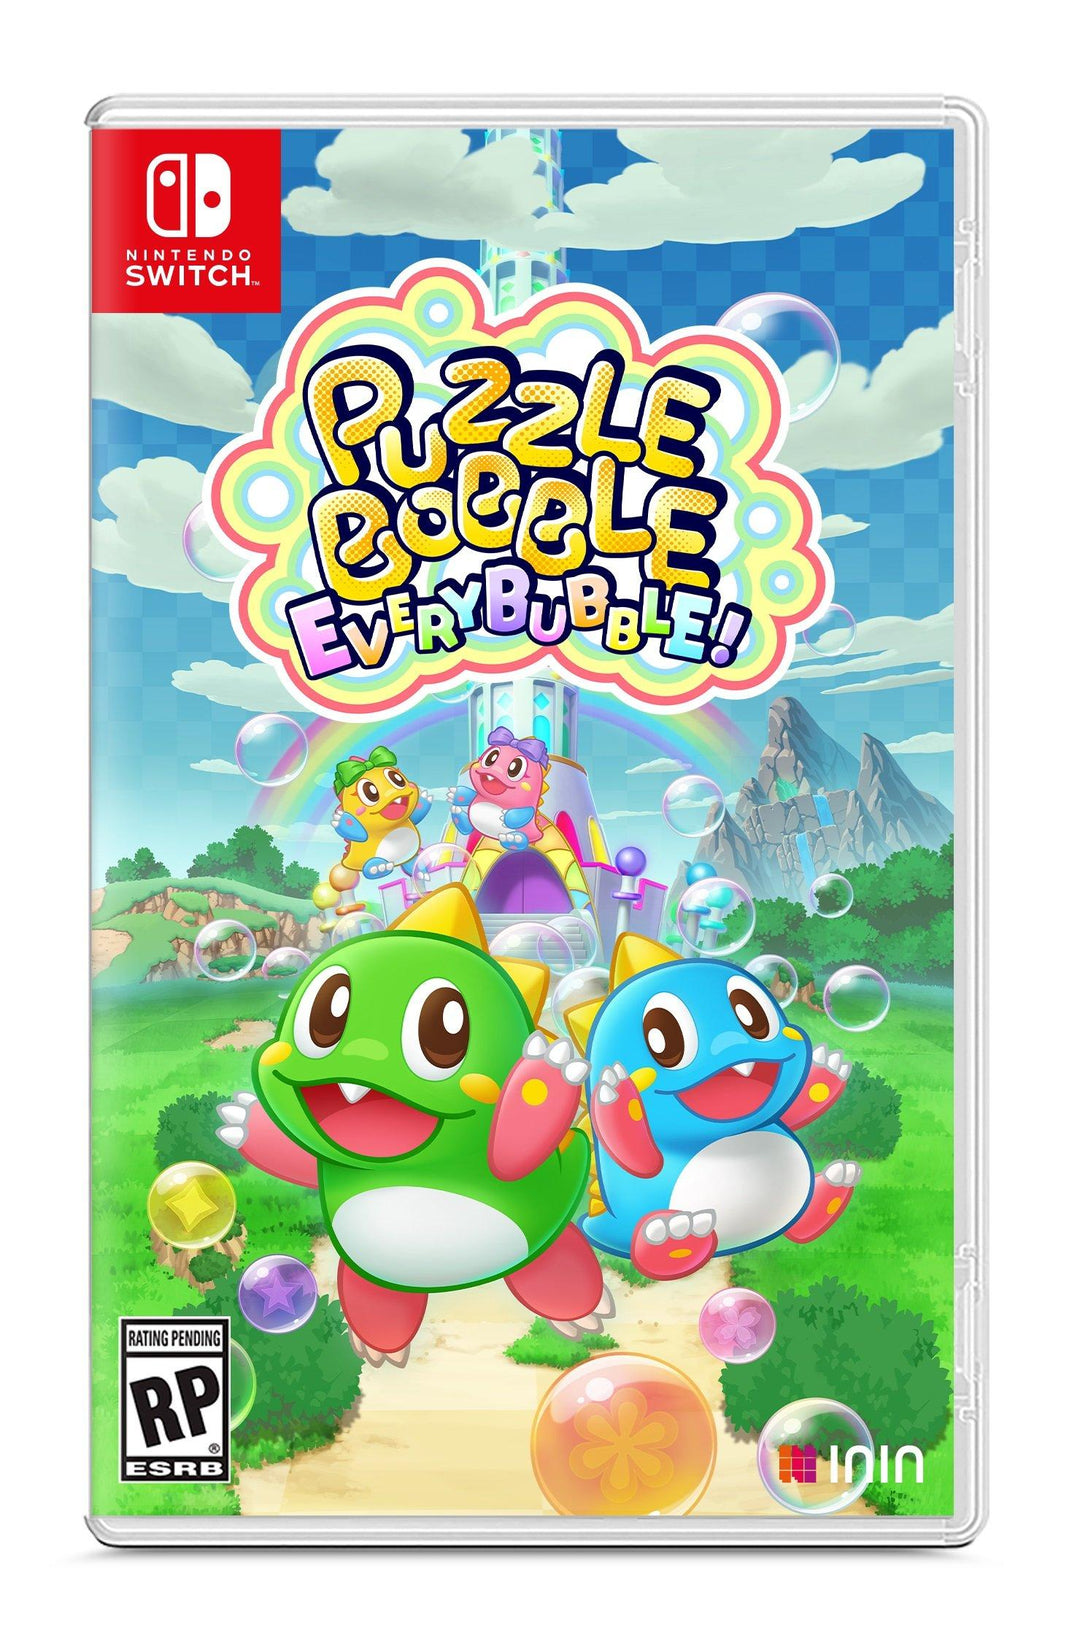 Puzzle Bobble Everybubble! for Nintendo Switch